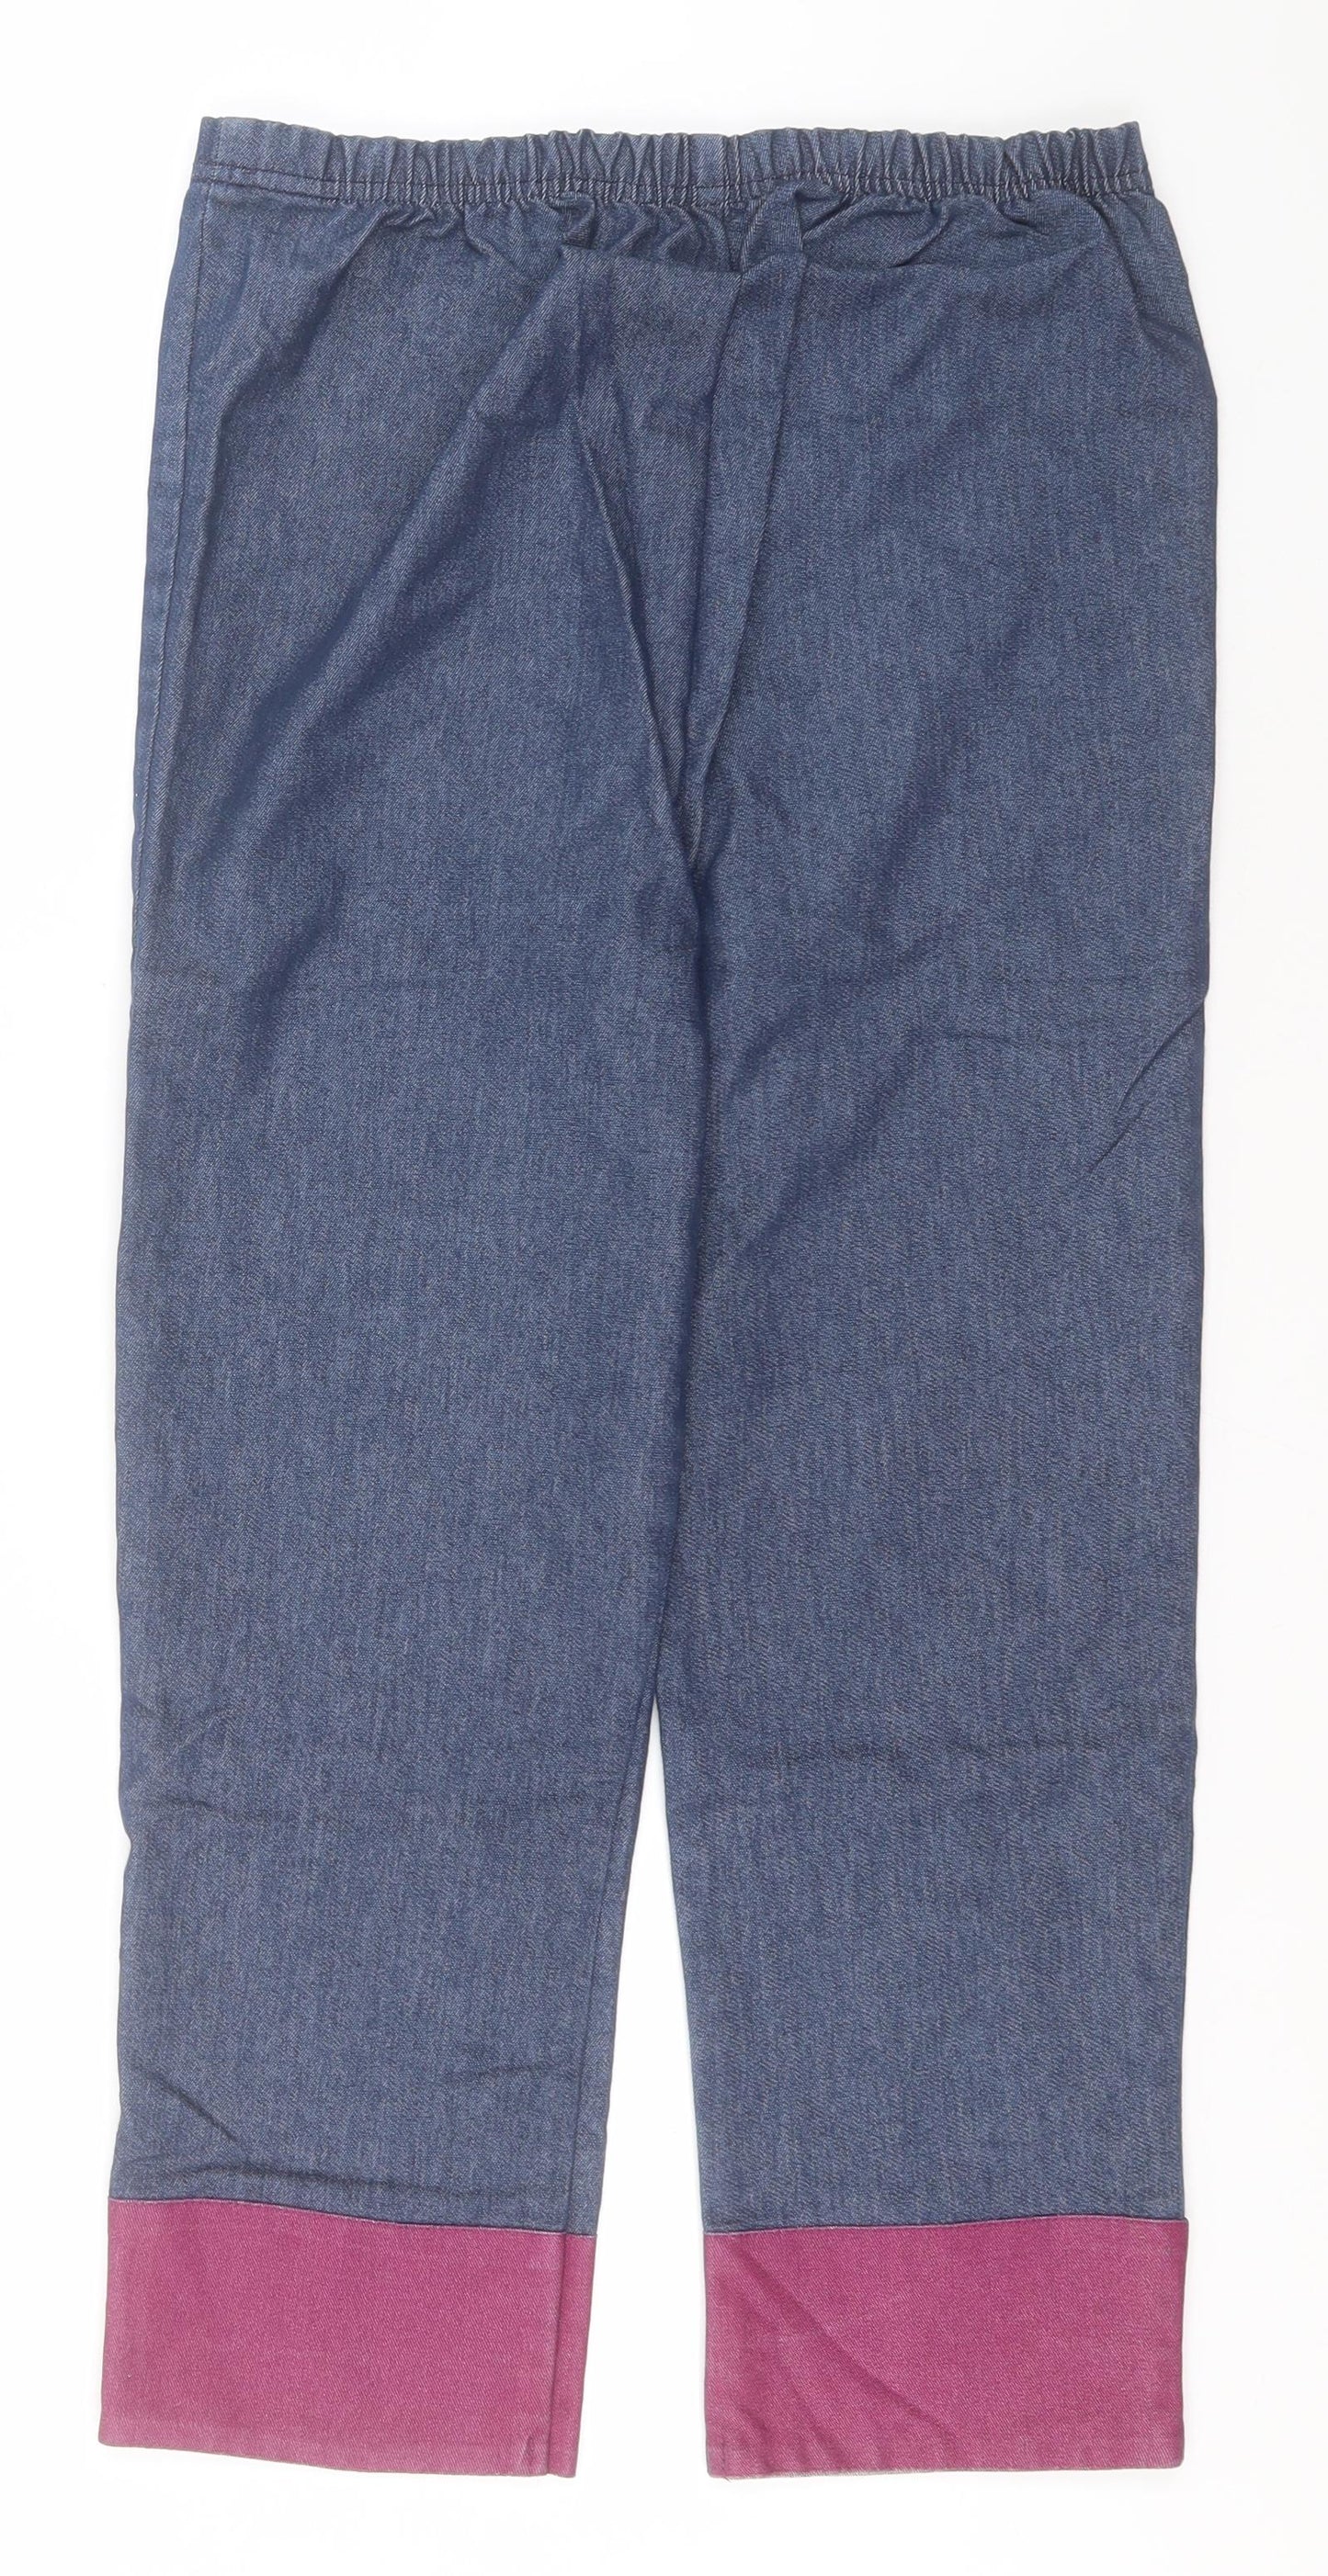 Marks and Spencer Girls Blue  Cotton Jegging Trousers Size 14 Years  Regular